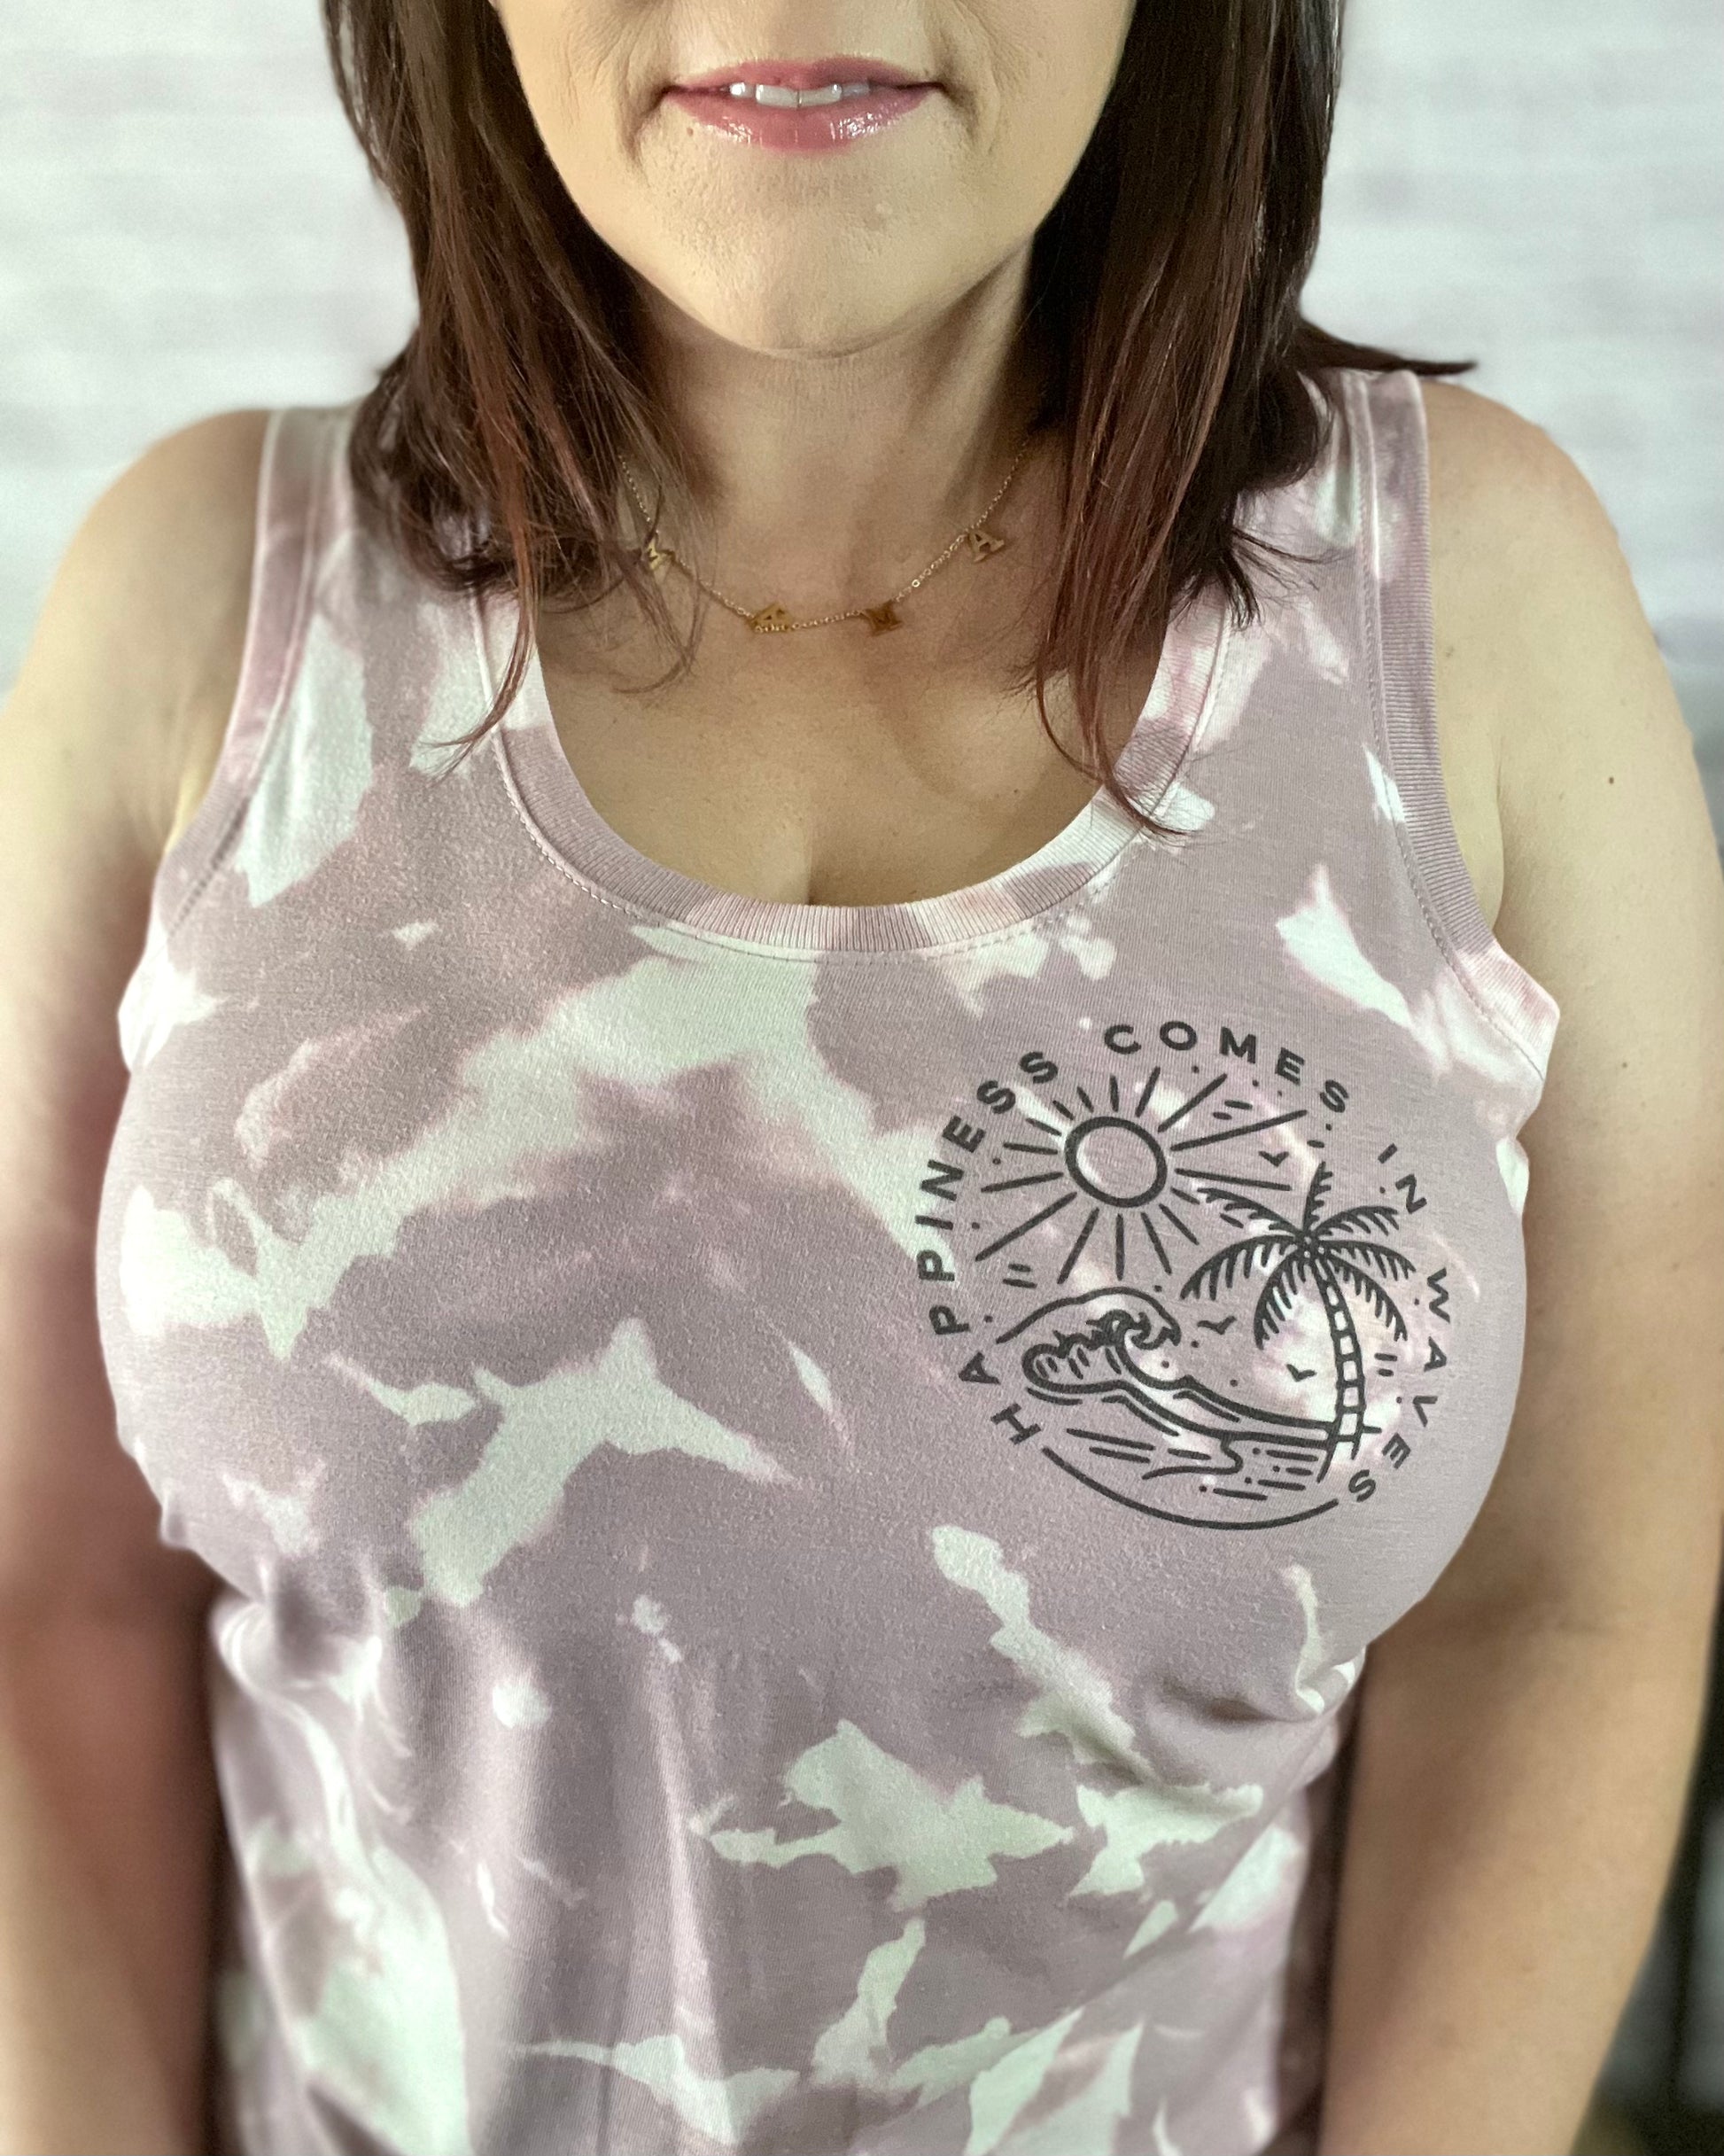 Happiness Comes In Waves - Women's shirts -  Rustic Cuts